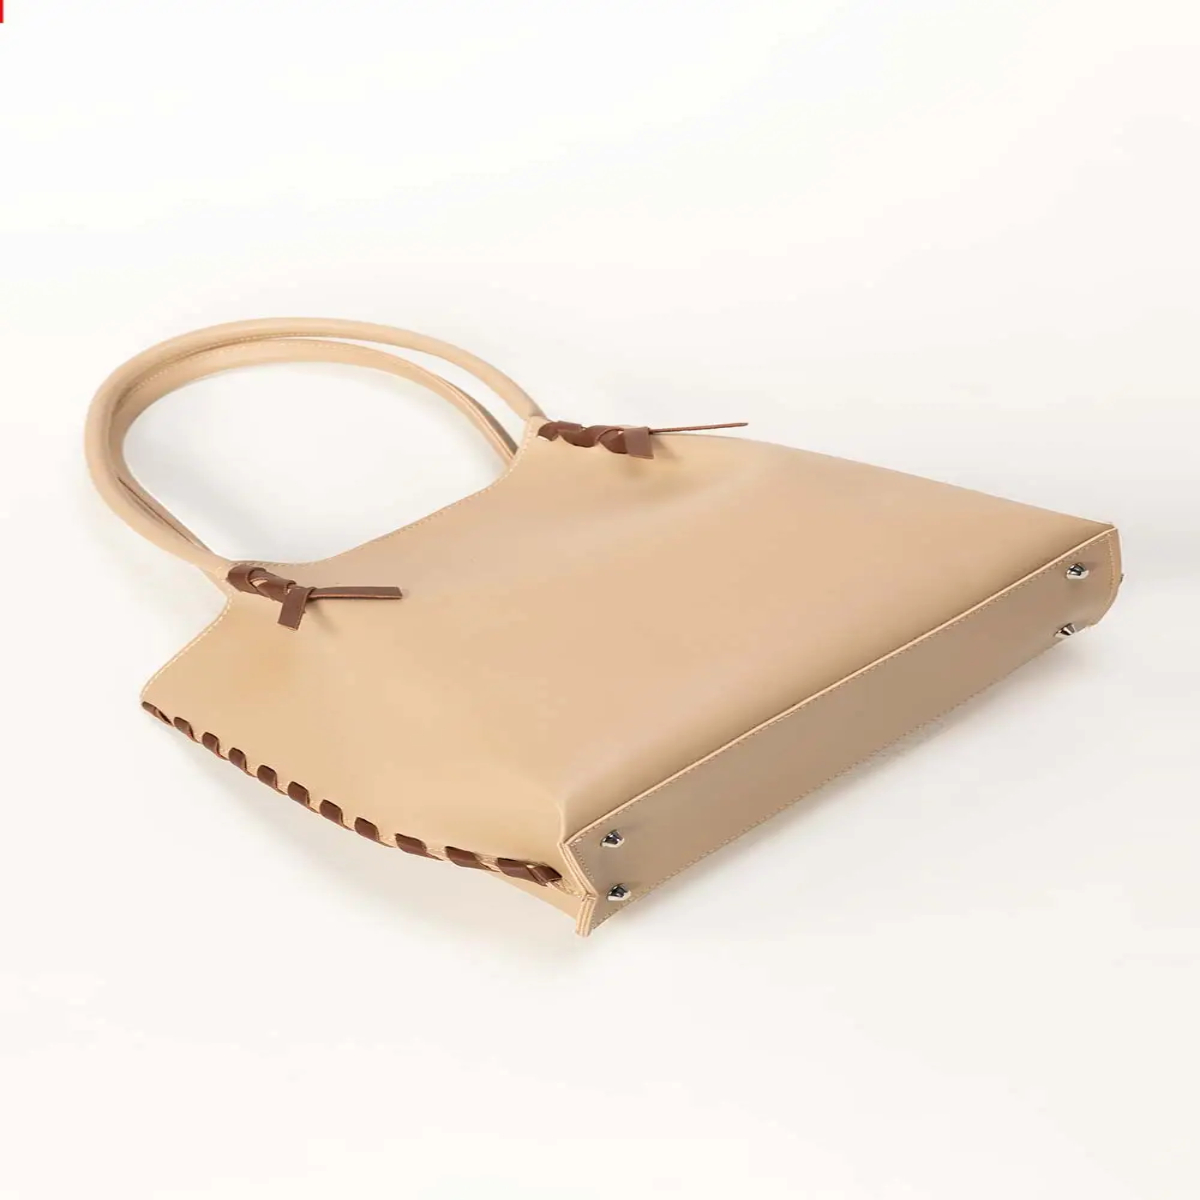 Tote Bag Organizer Off White-Brown Tote Bags for Women, a Sophisticated & Versatile Accessory for the Modern Individual-Professional | Askani Group